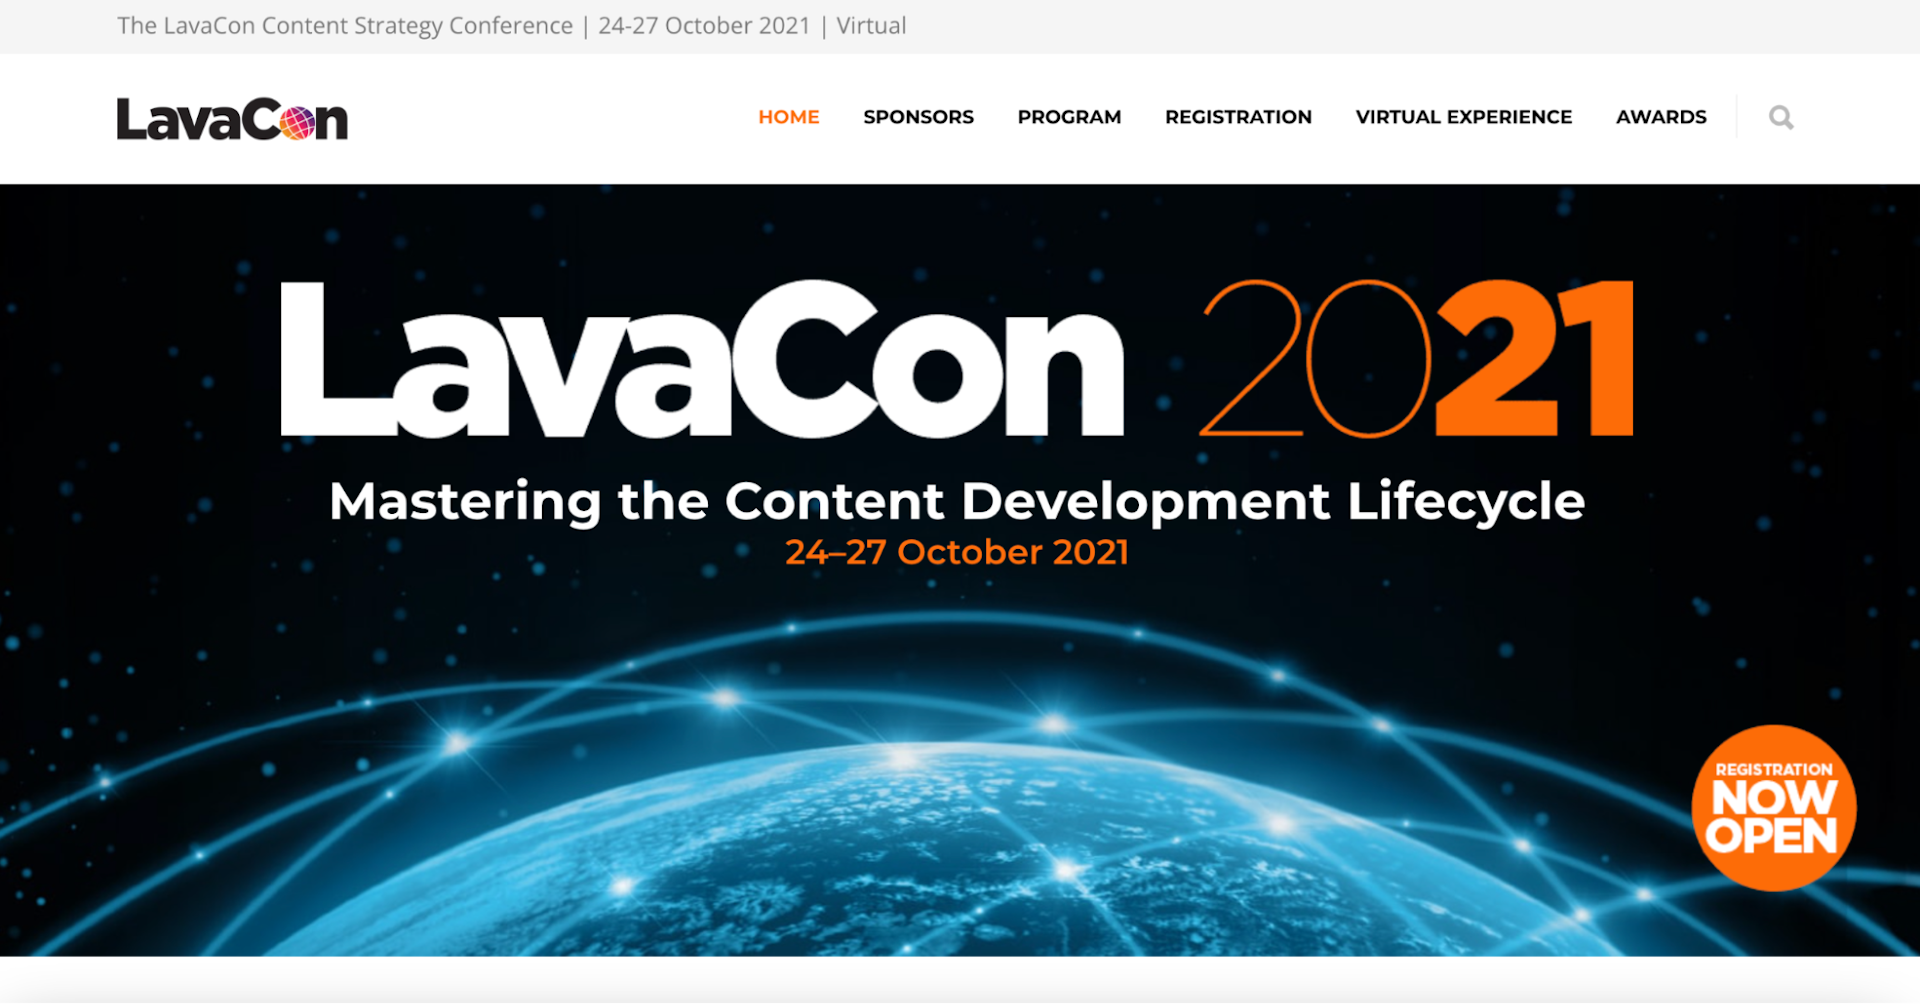 Event page for LavaCon 2021